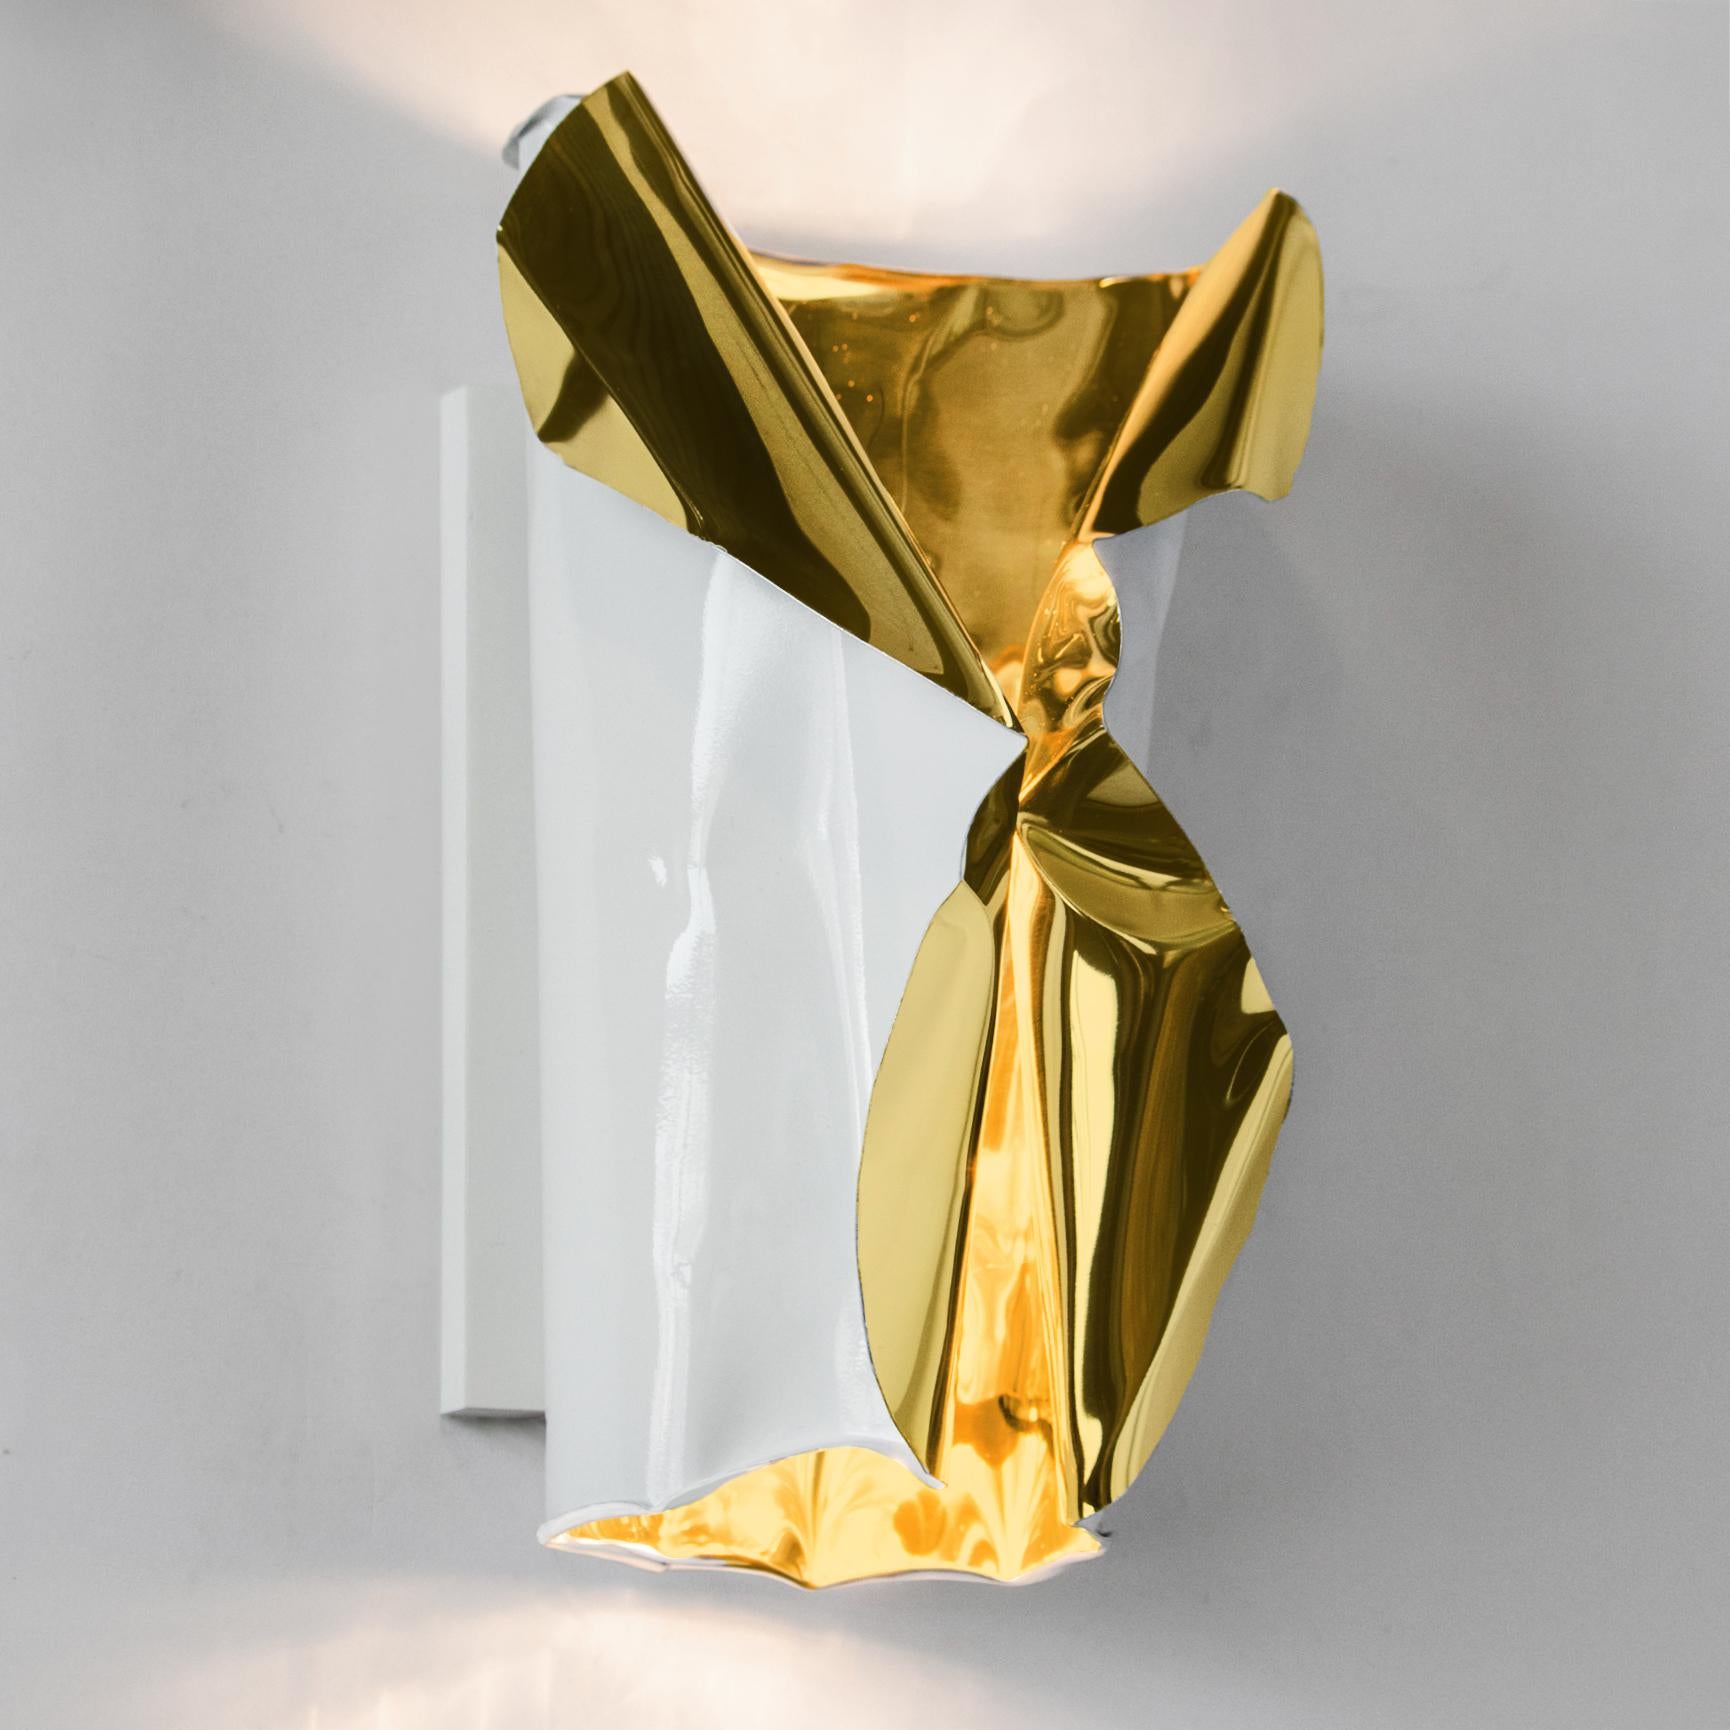 The LUSTER wall sconce is handcrafted from polished gold aluminum. Each piece is individually sculpted by hand so while similar no two pieces are identical. The effect is a stunning warm glow that works in residential, hospitality and commercial